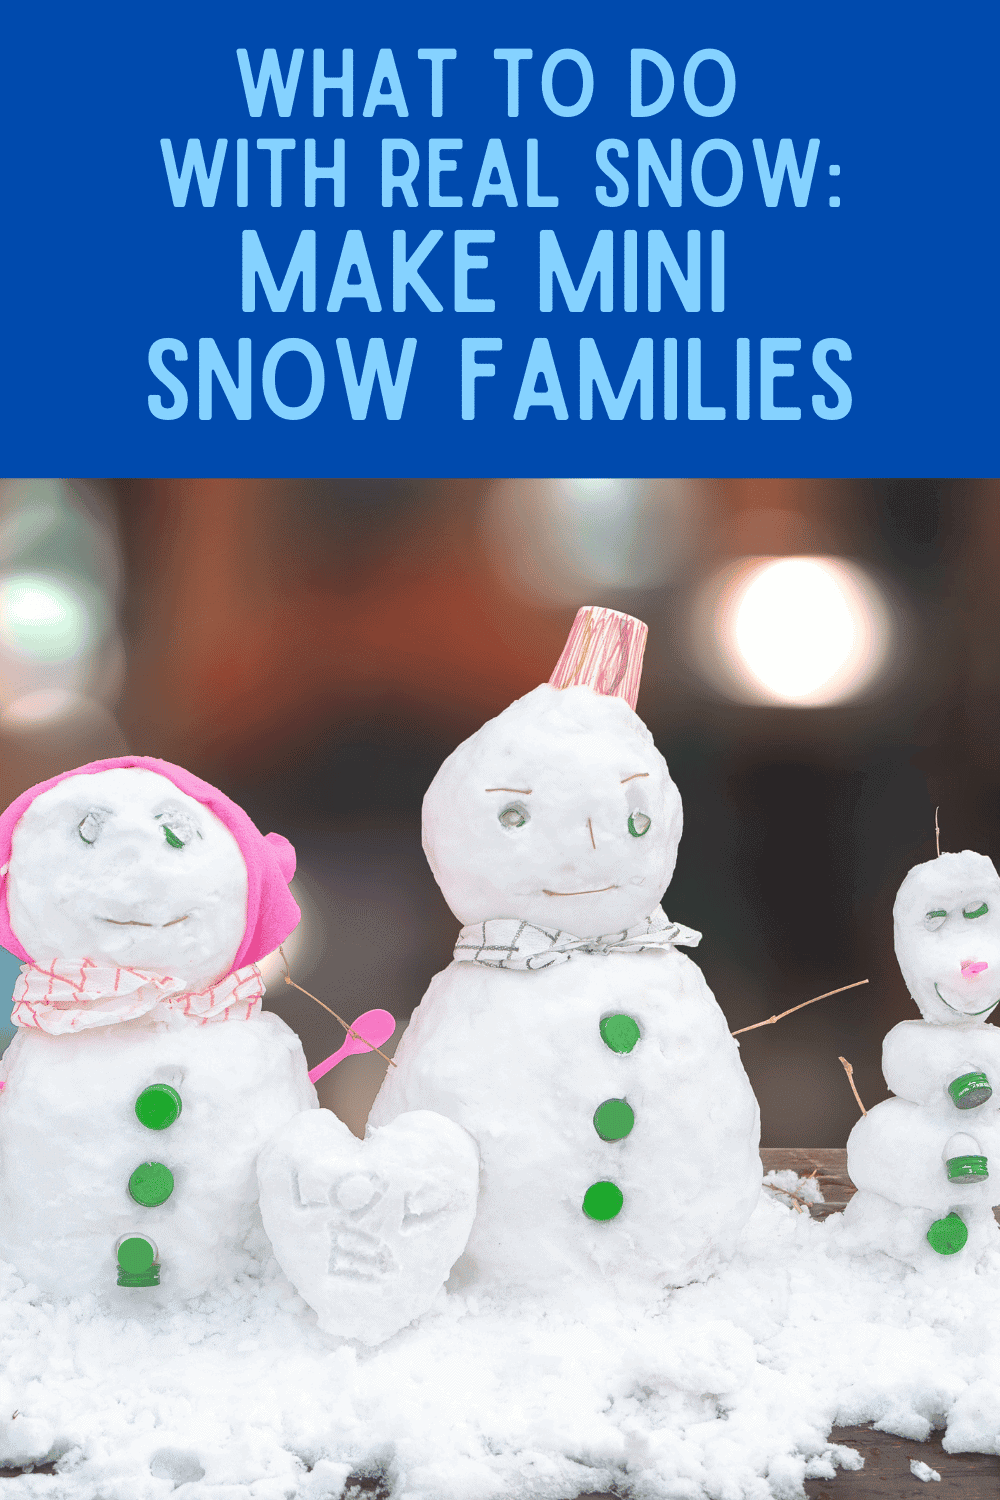 what to make with real snow - make mini snow people text over 3 mini snowmen on snow